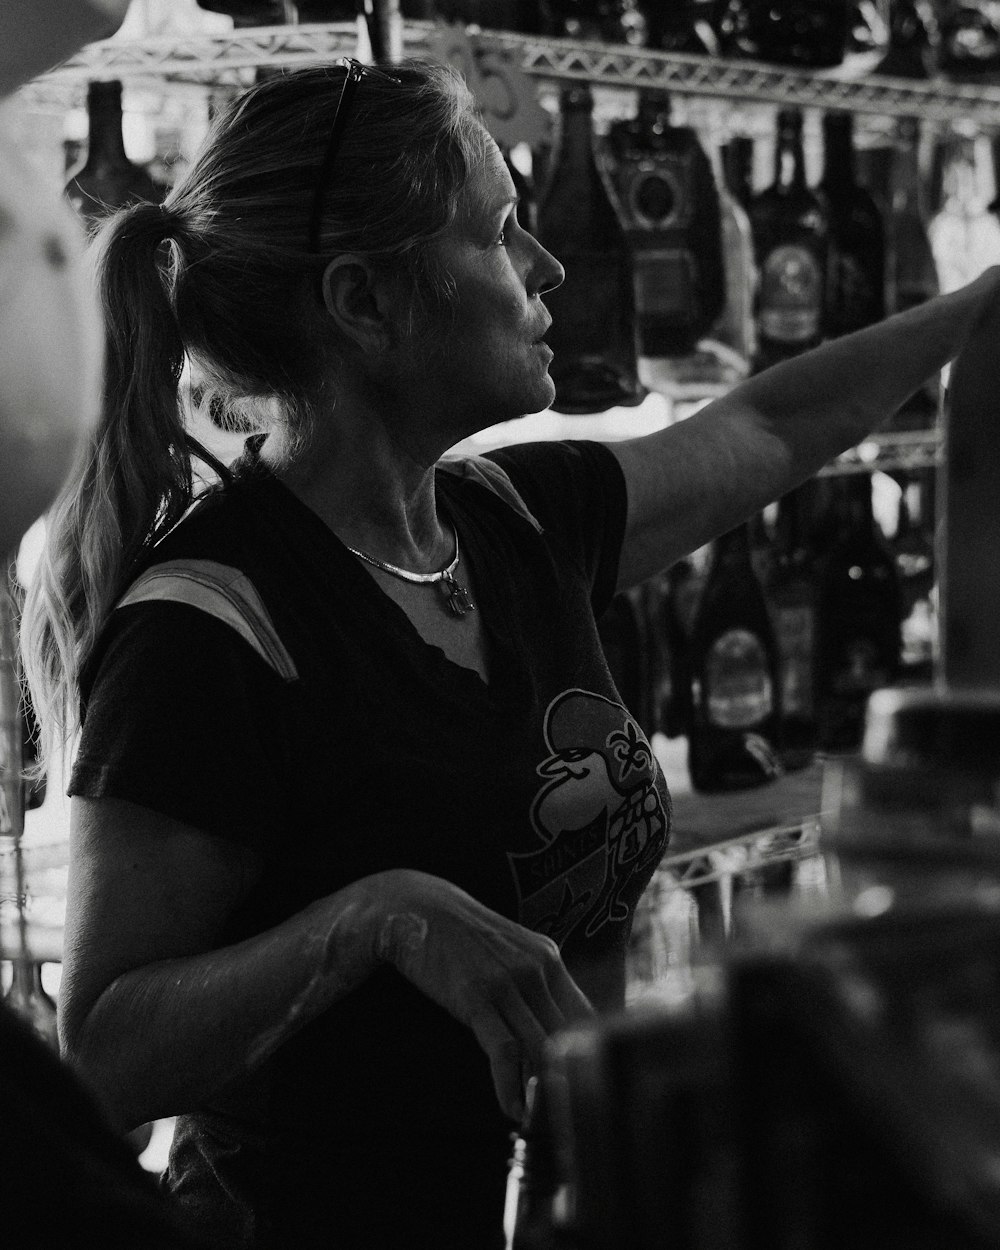 a woman standing in front of a bar filled with bottles